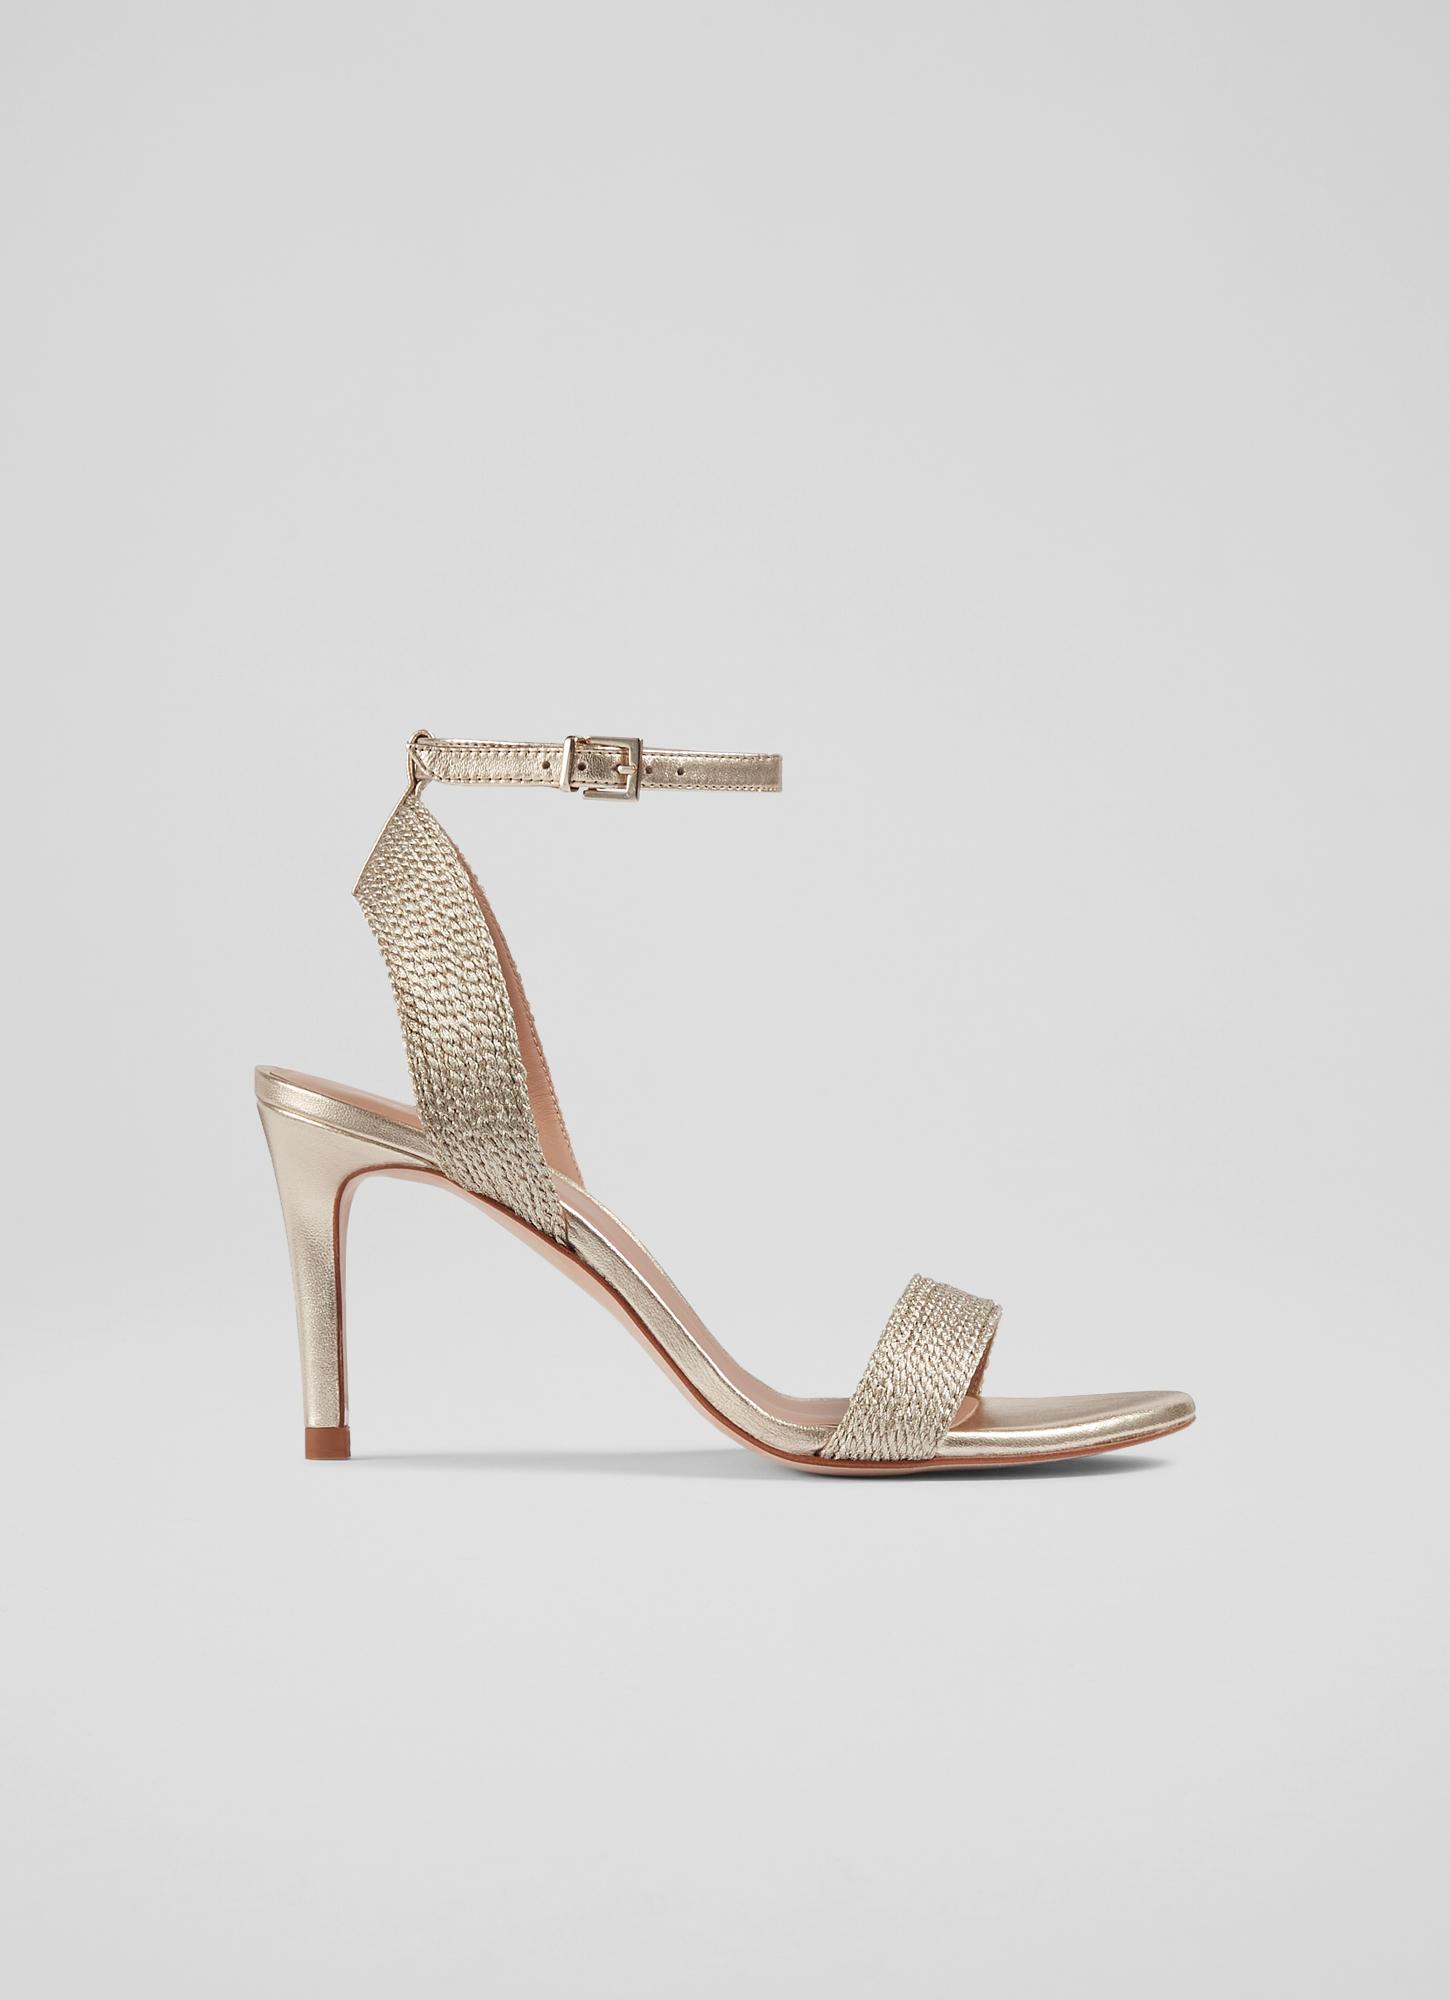 Gold Metallic Open Toe Ankle Buckle Strappy High Heel Sandals|FSJshoes